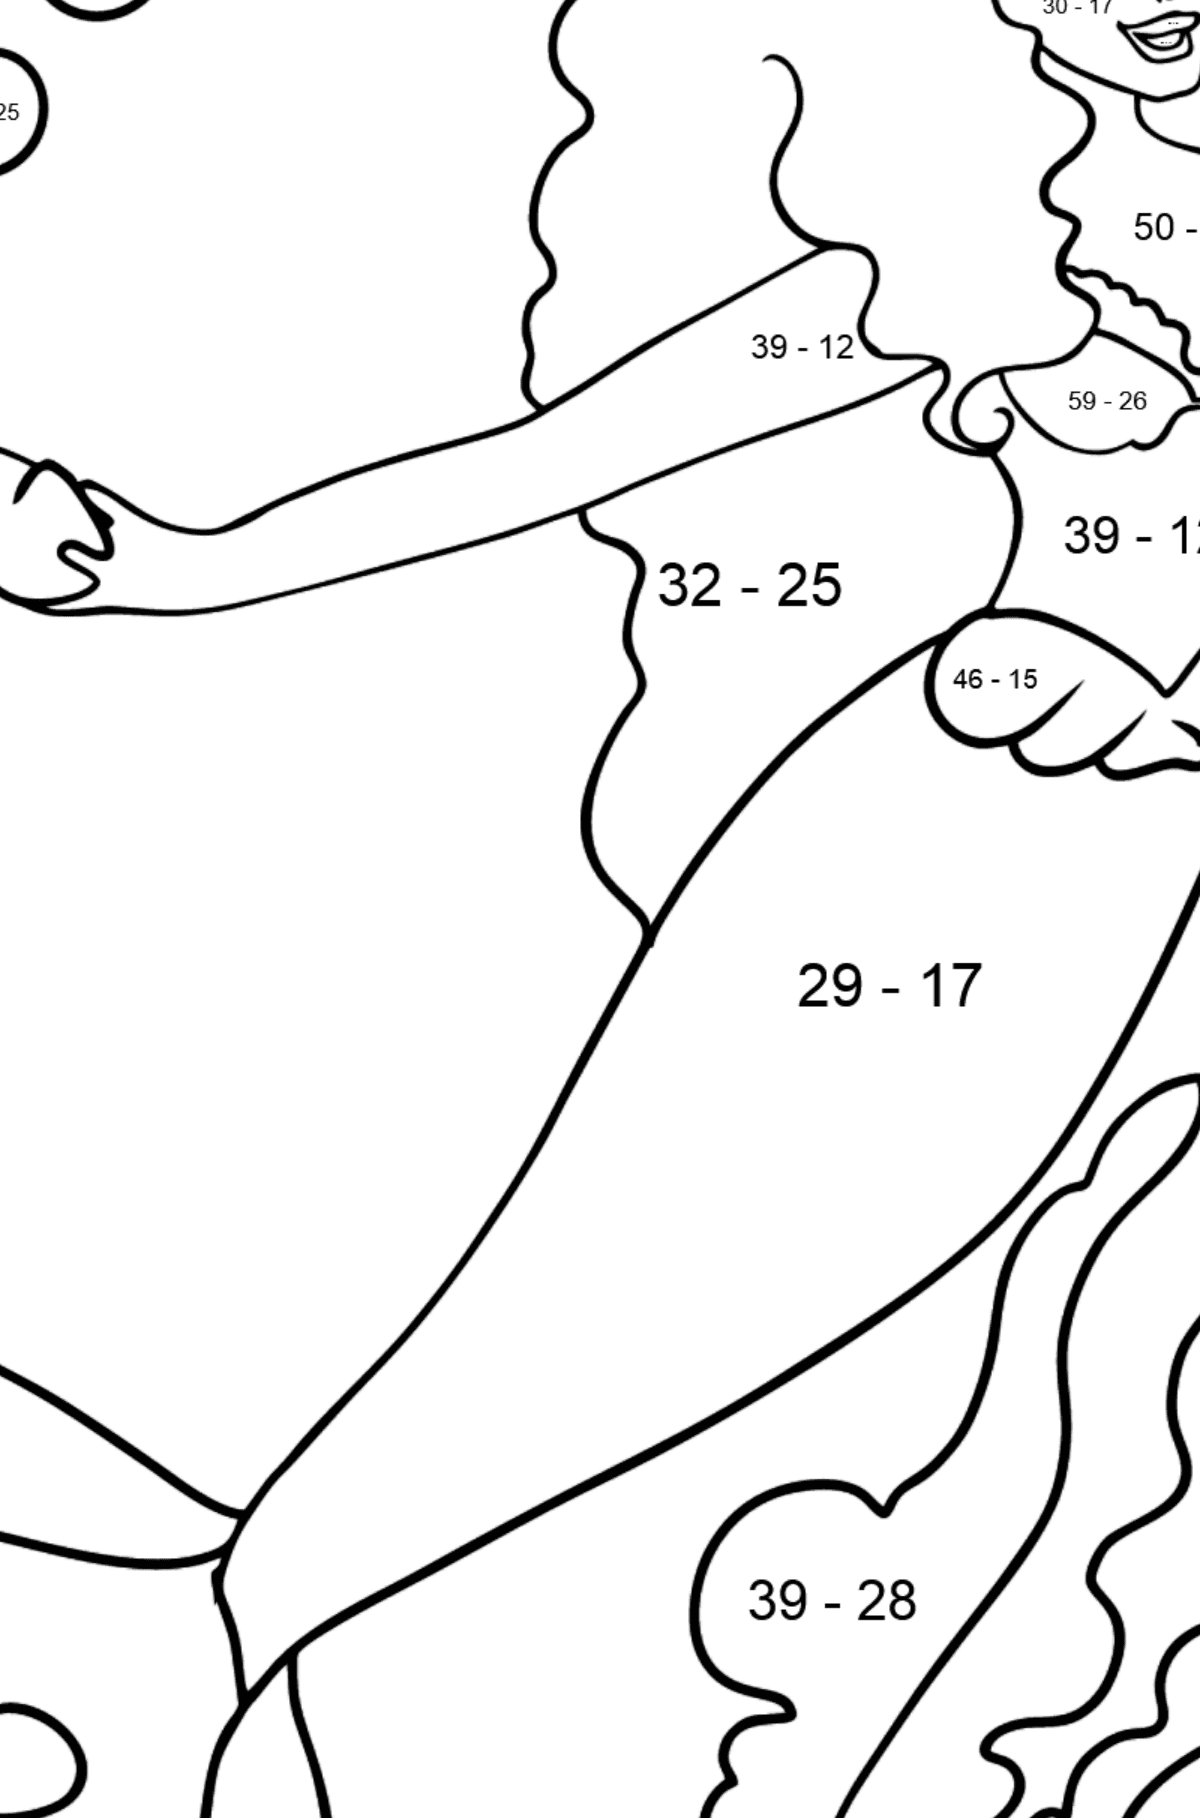 Coloring Page Mermaid and two crabs - Math Coloring - Subtraction for Kids